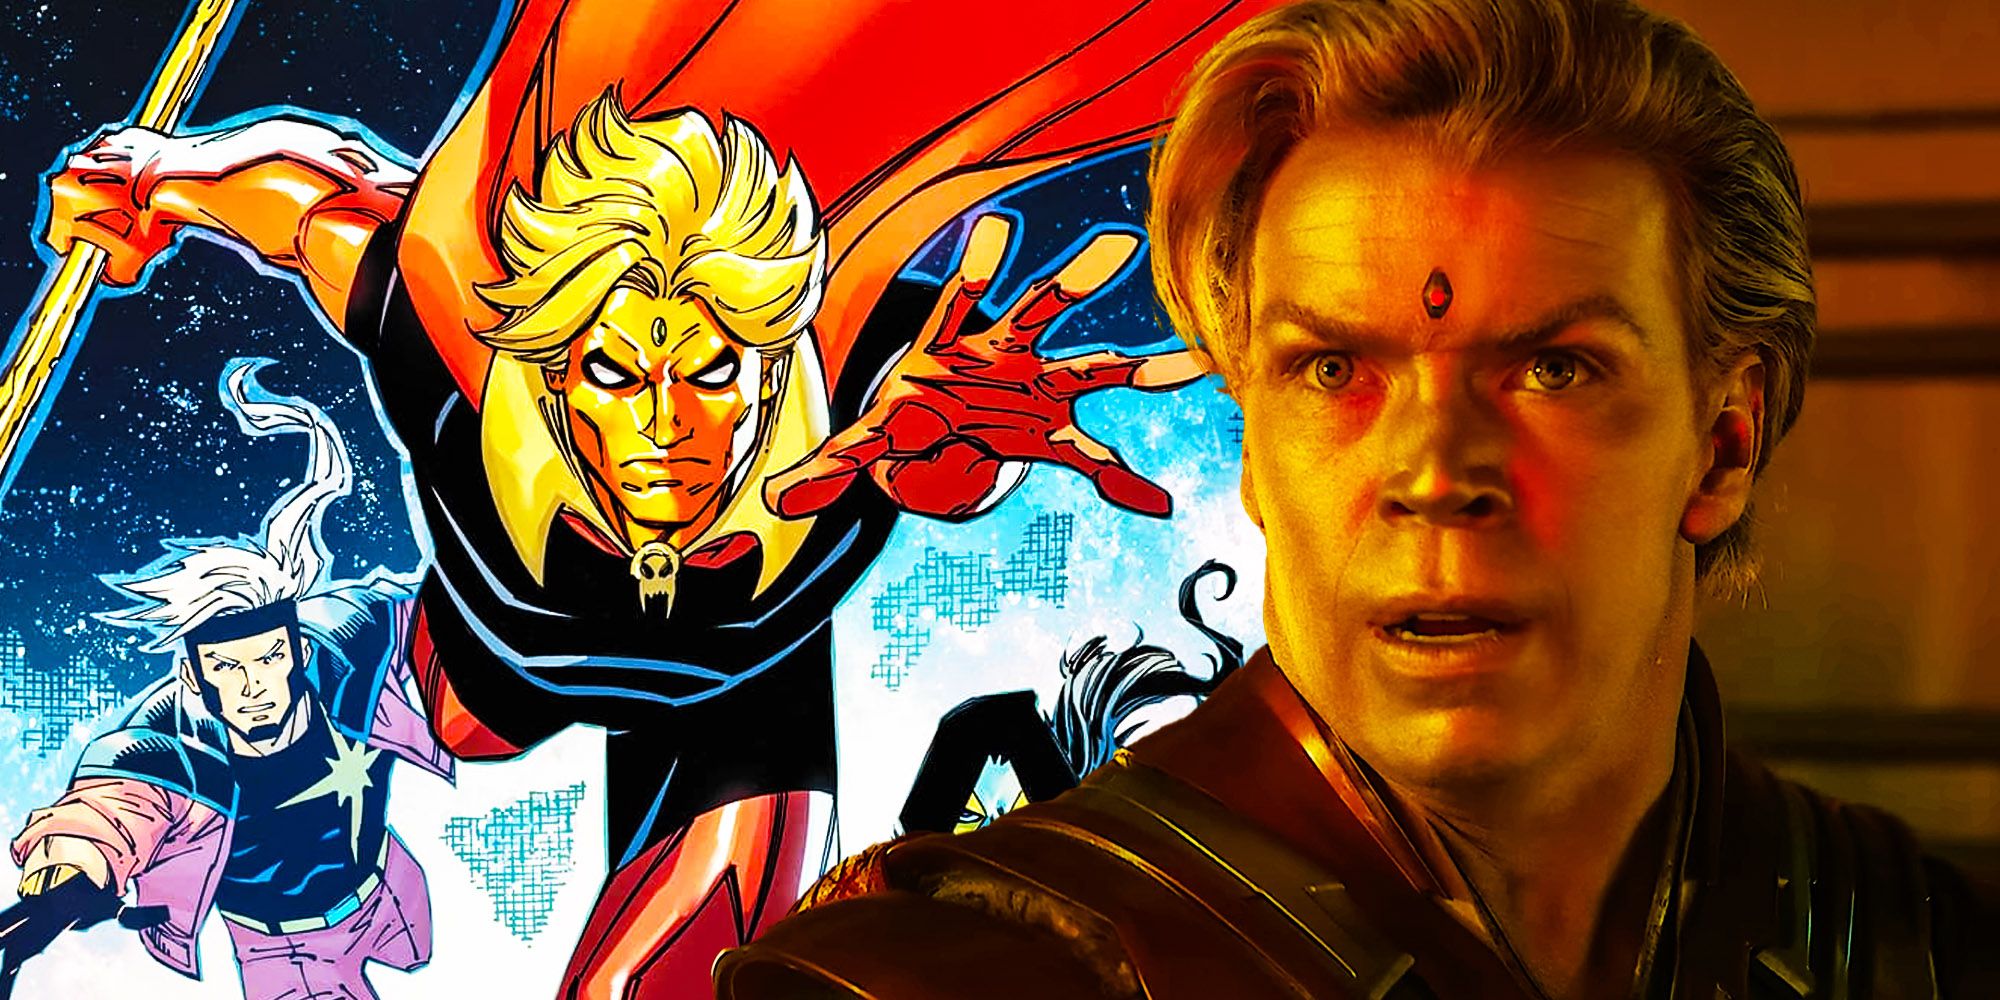 David Corenswet’s MCU Role Would Have Introduced A Very Different Adam Warlock